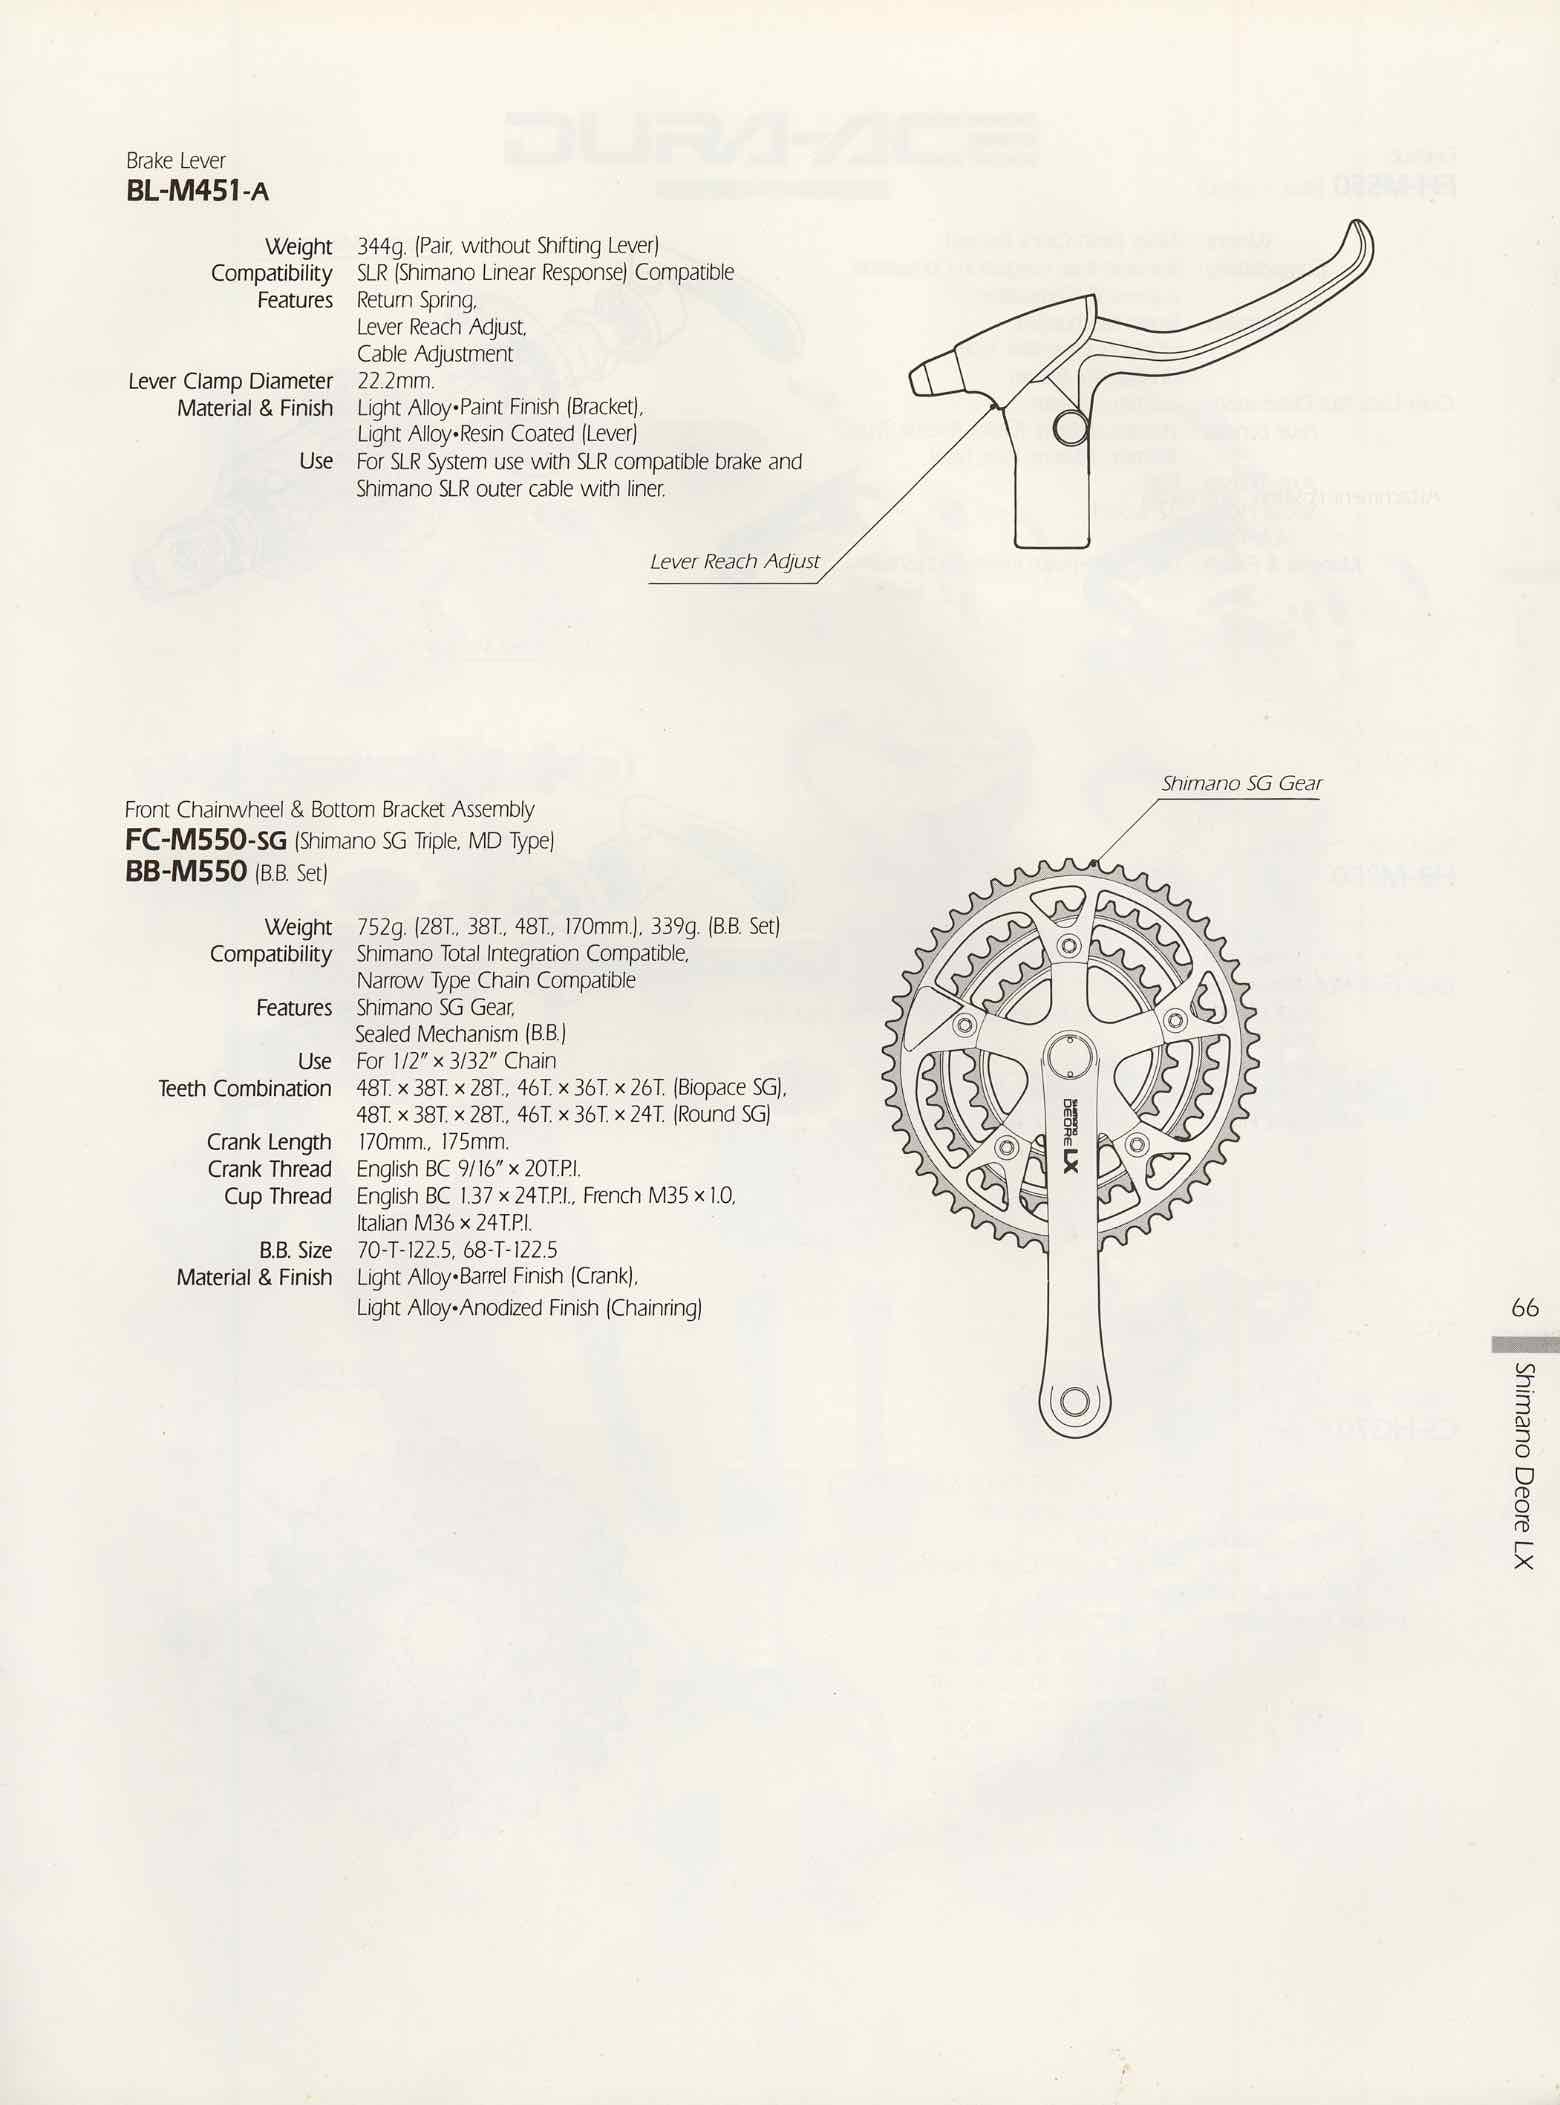 Shimano Bicycle System Component - 91 Page 66 main image